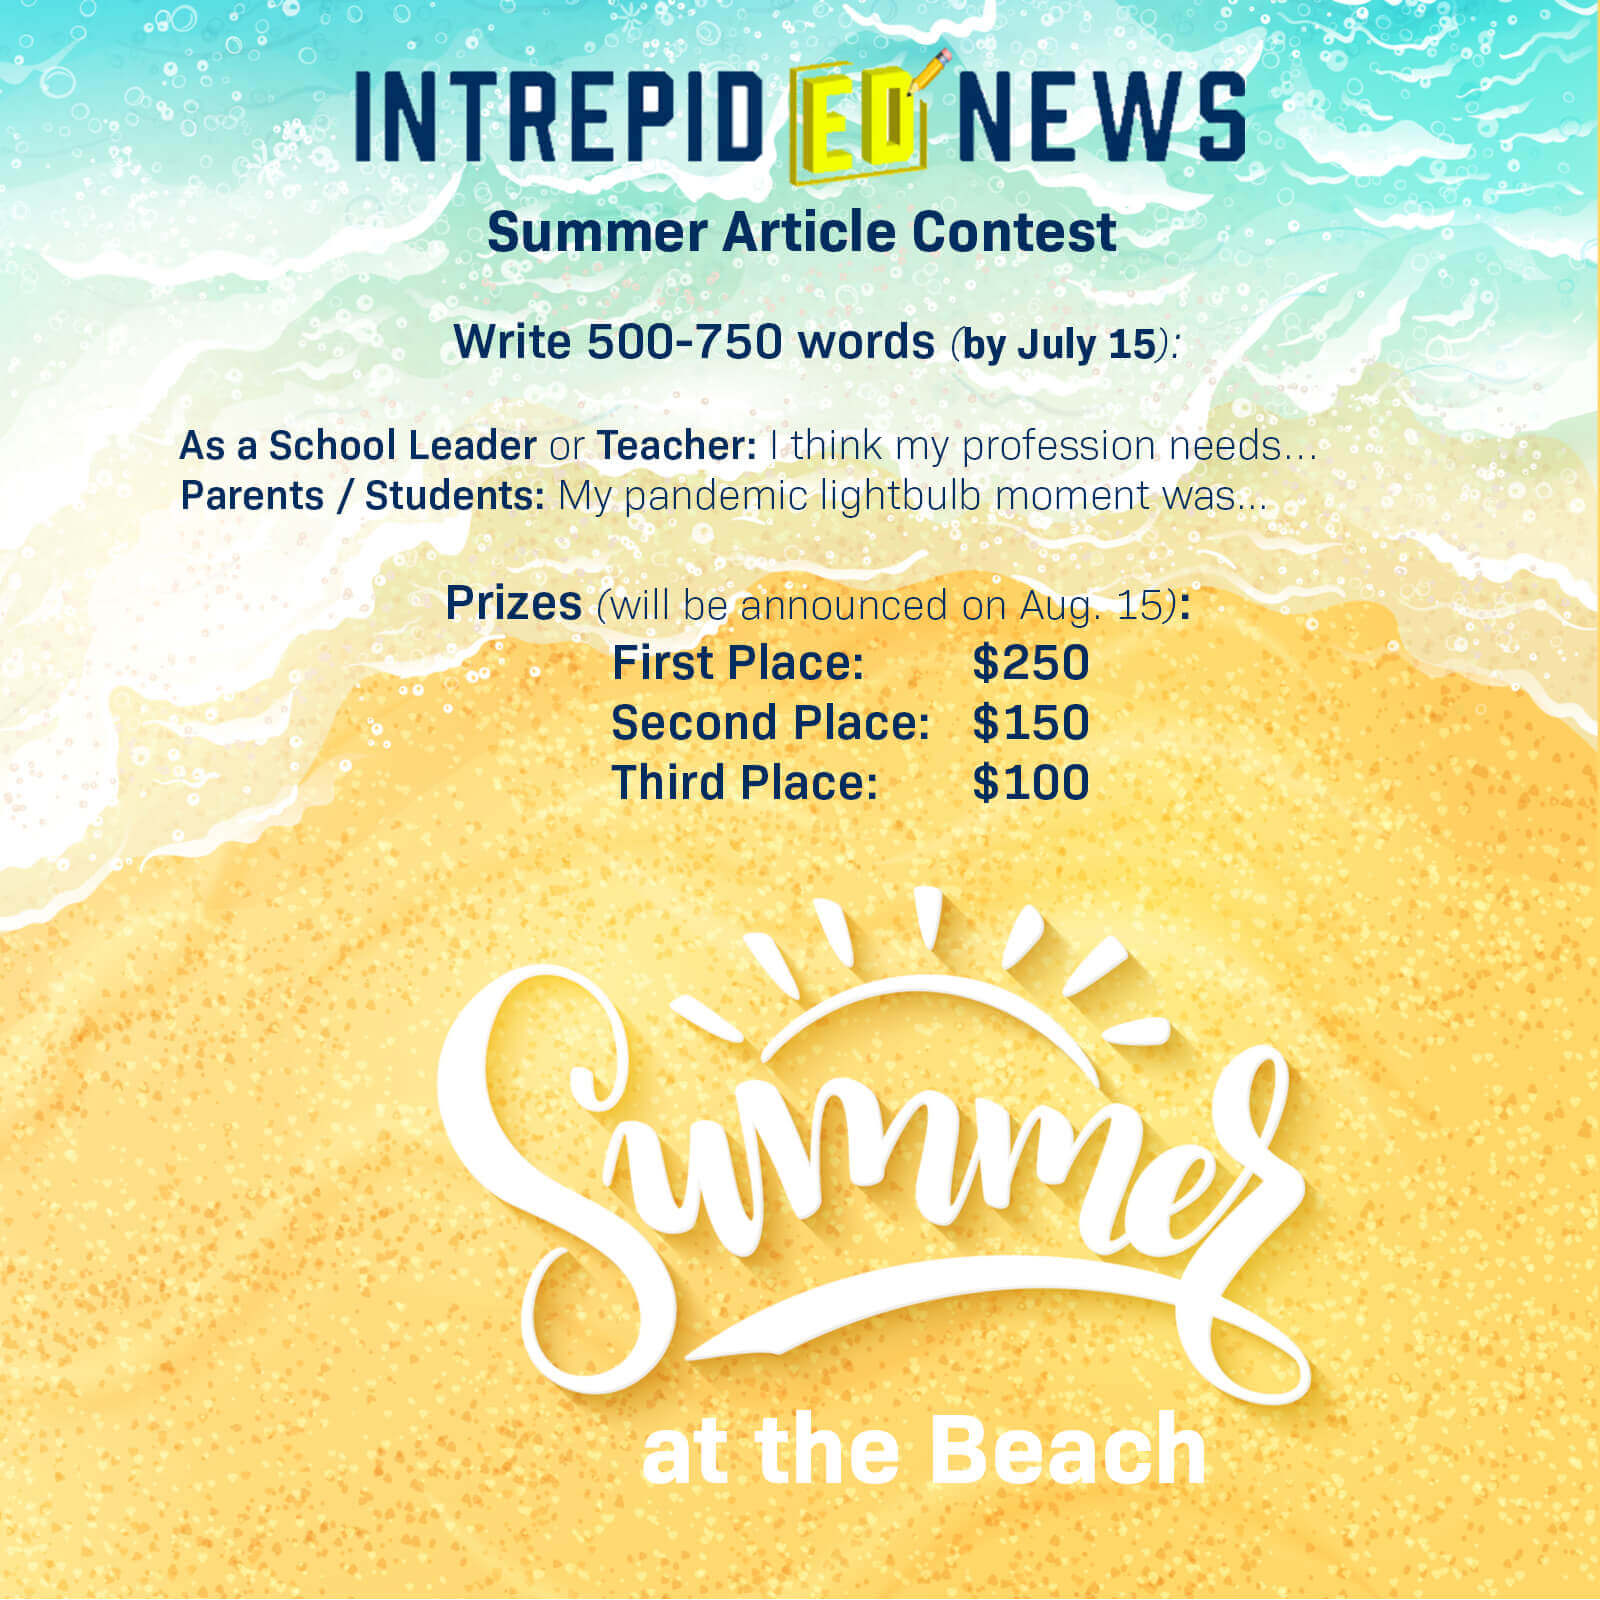 Summer at the Beach Intrepid Ed News Article Contest & Prizes  | 1 Min Read